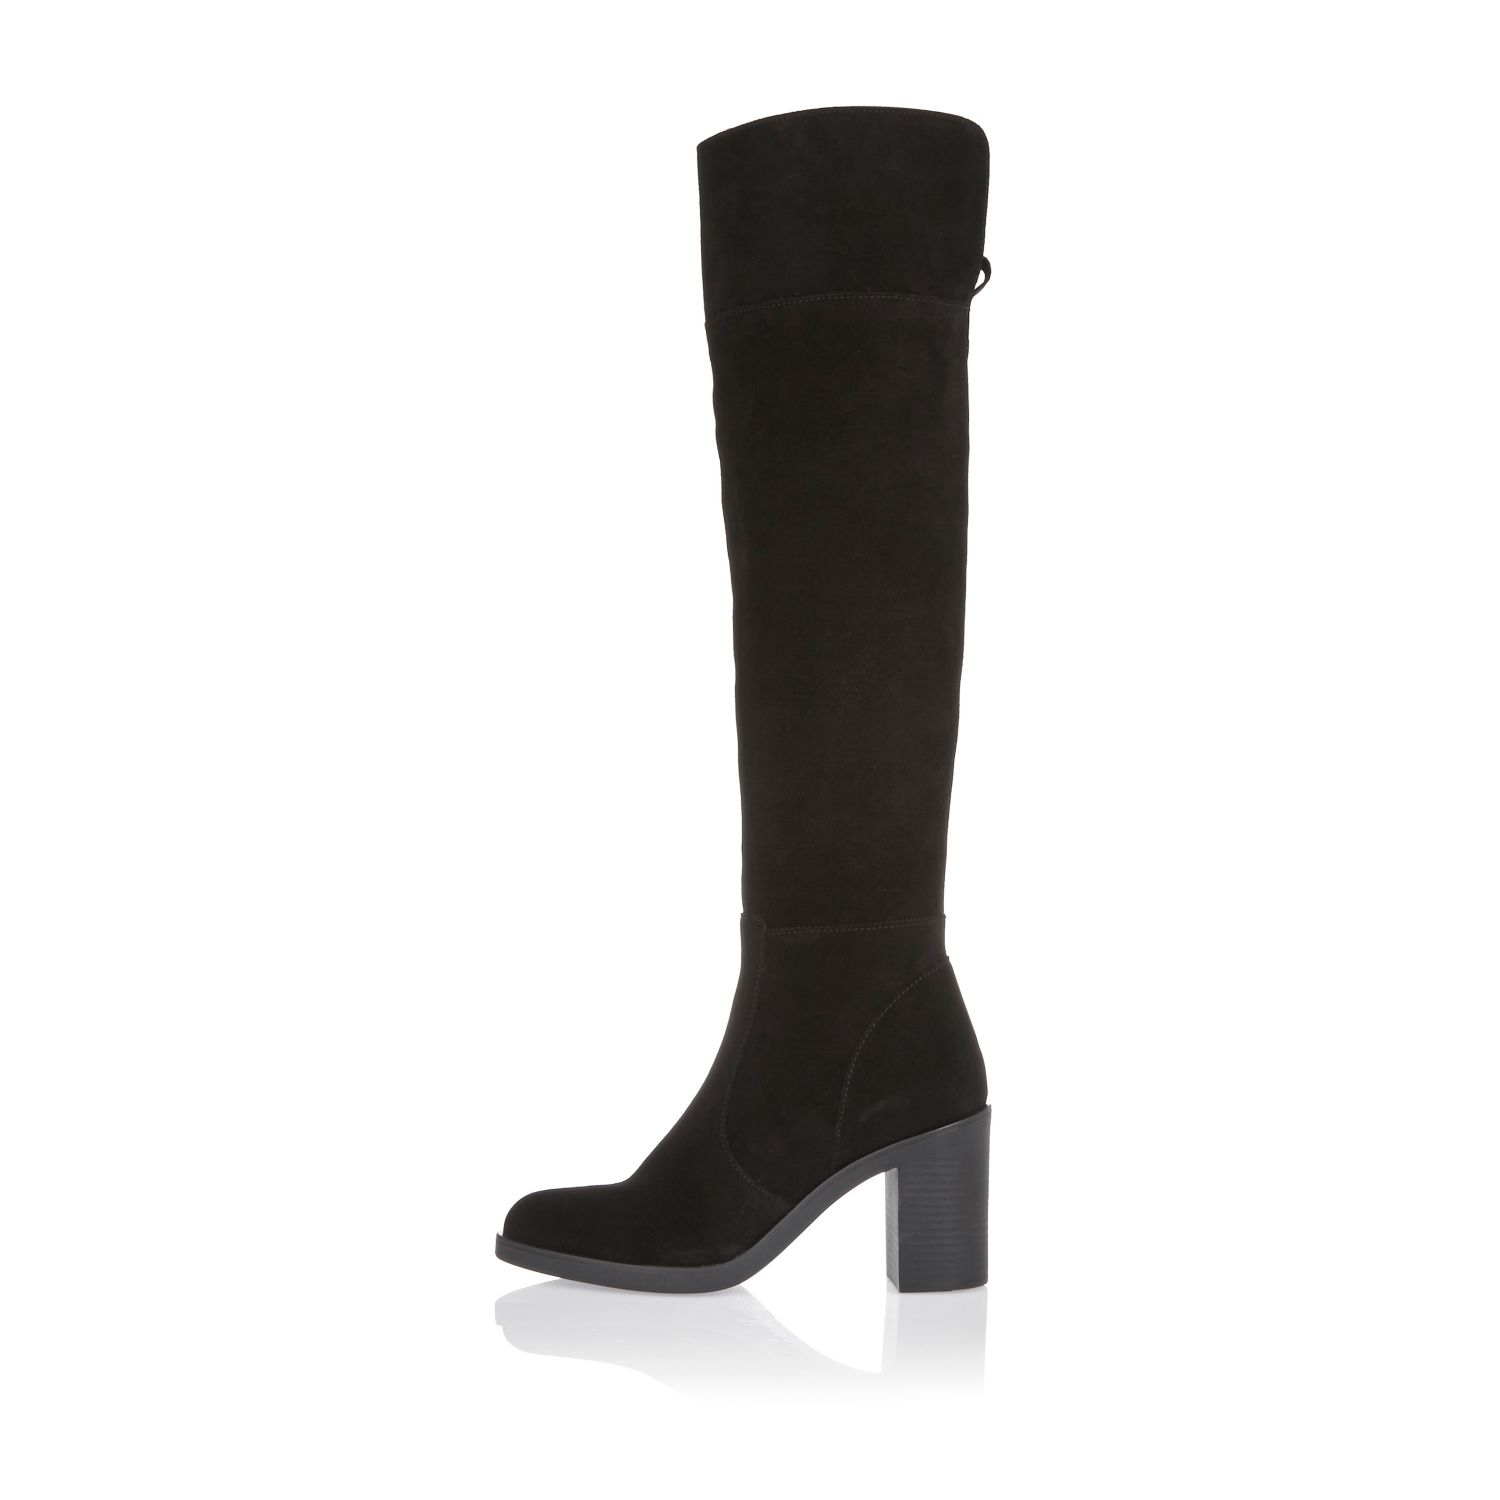 River Island Black Suede Knee High Boots - Lyst